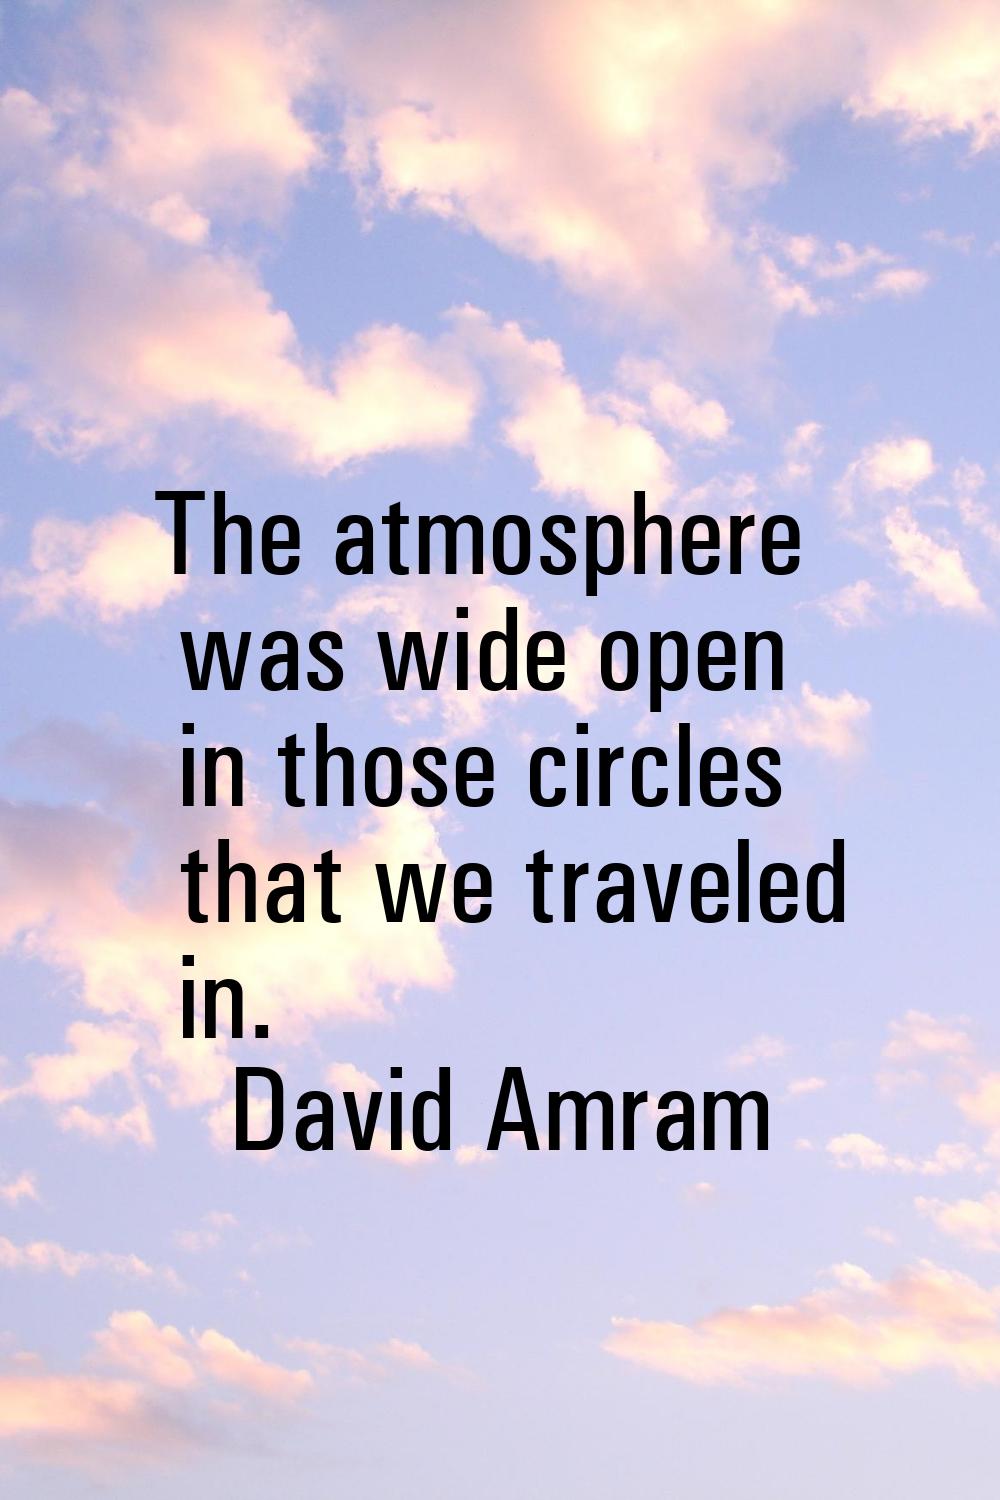 The atmosphere was wide open in those circles that we traveled in.